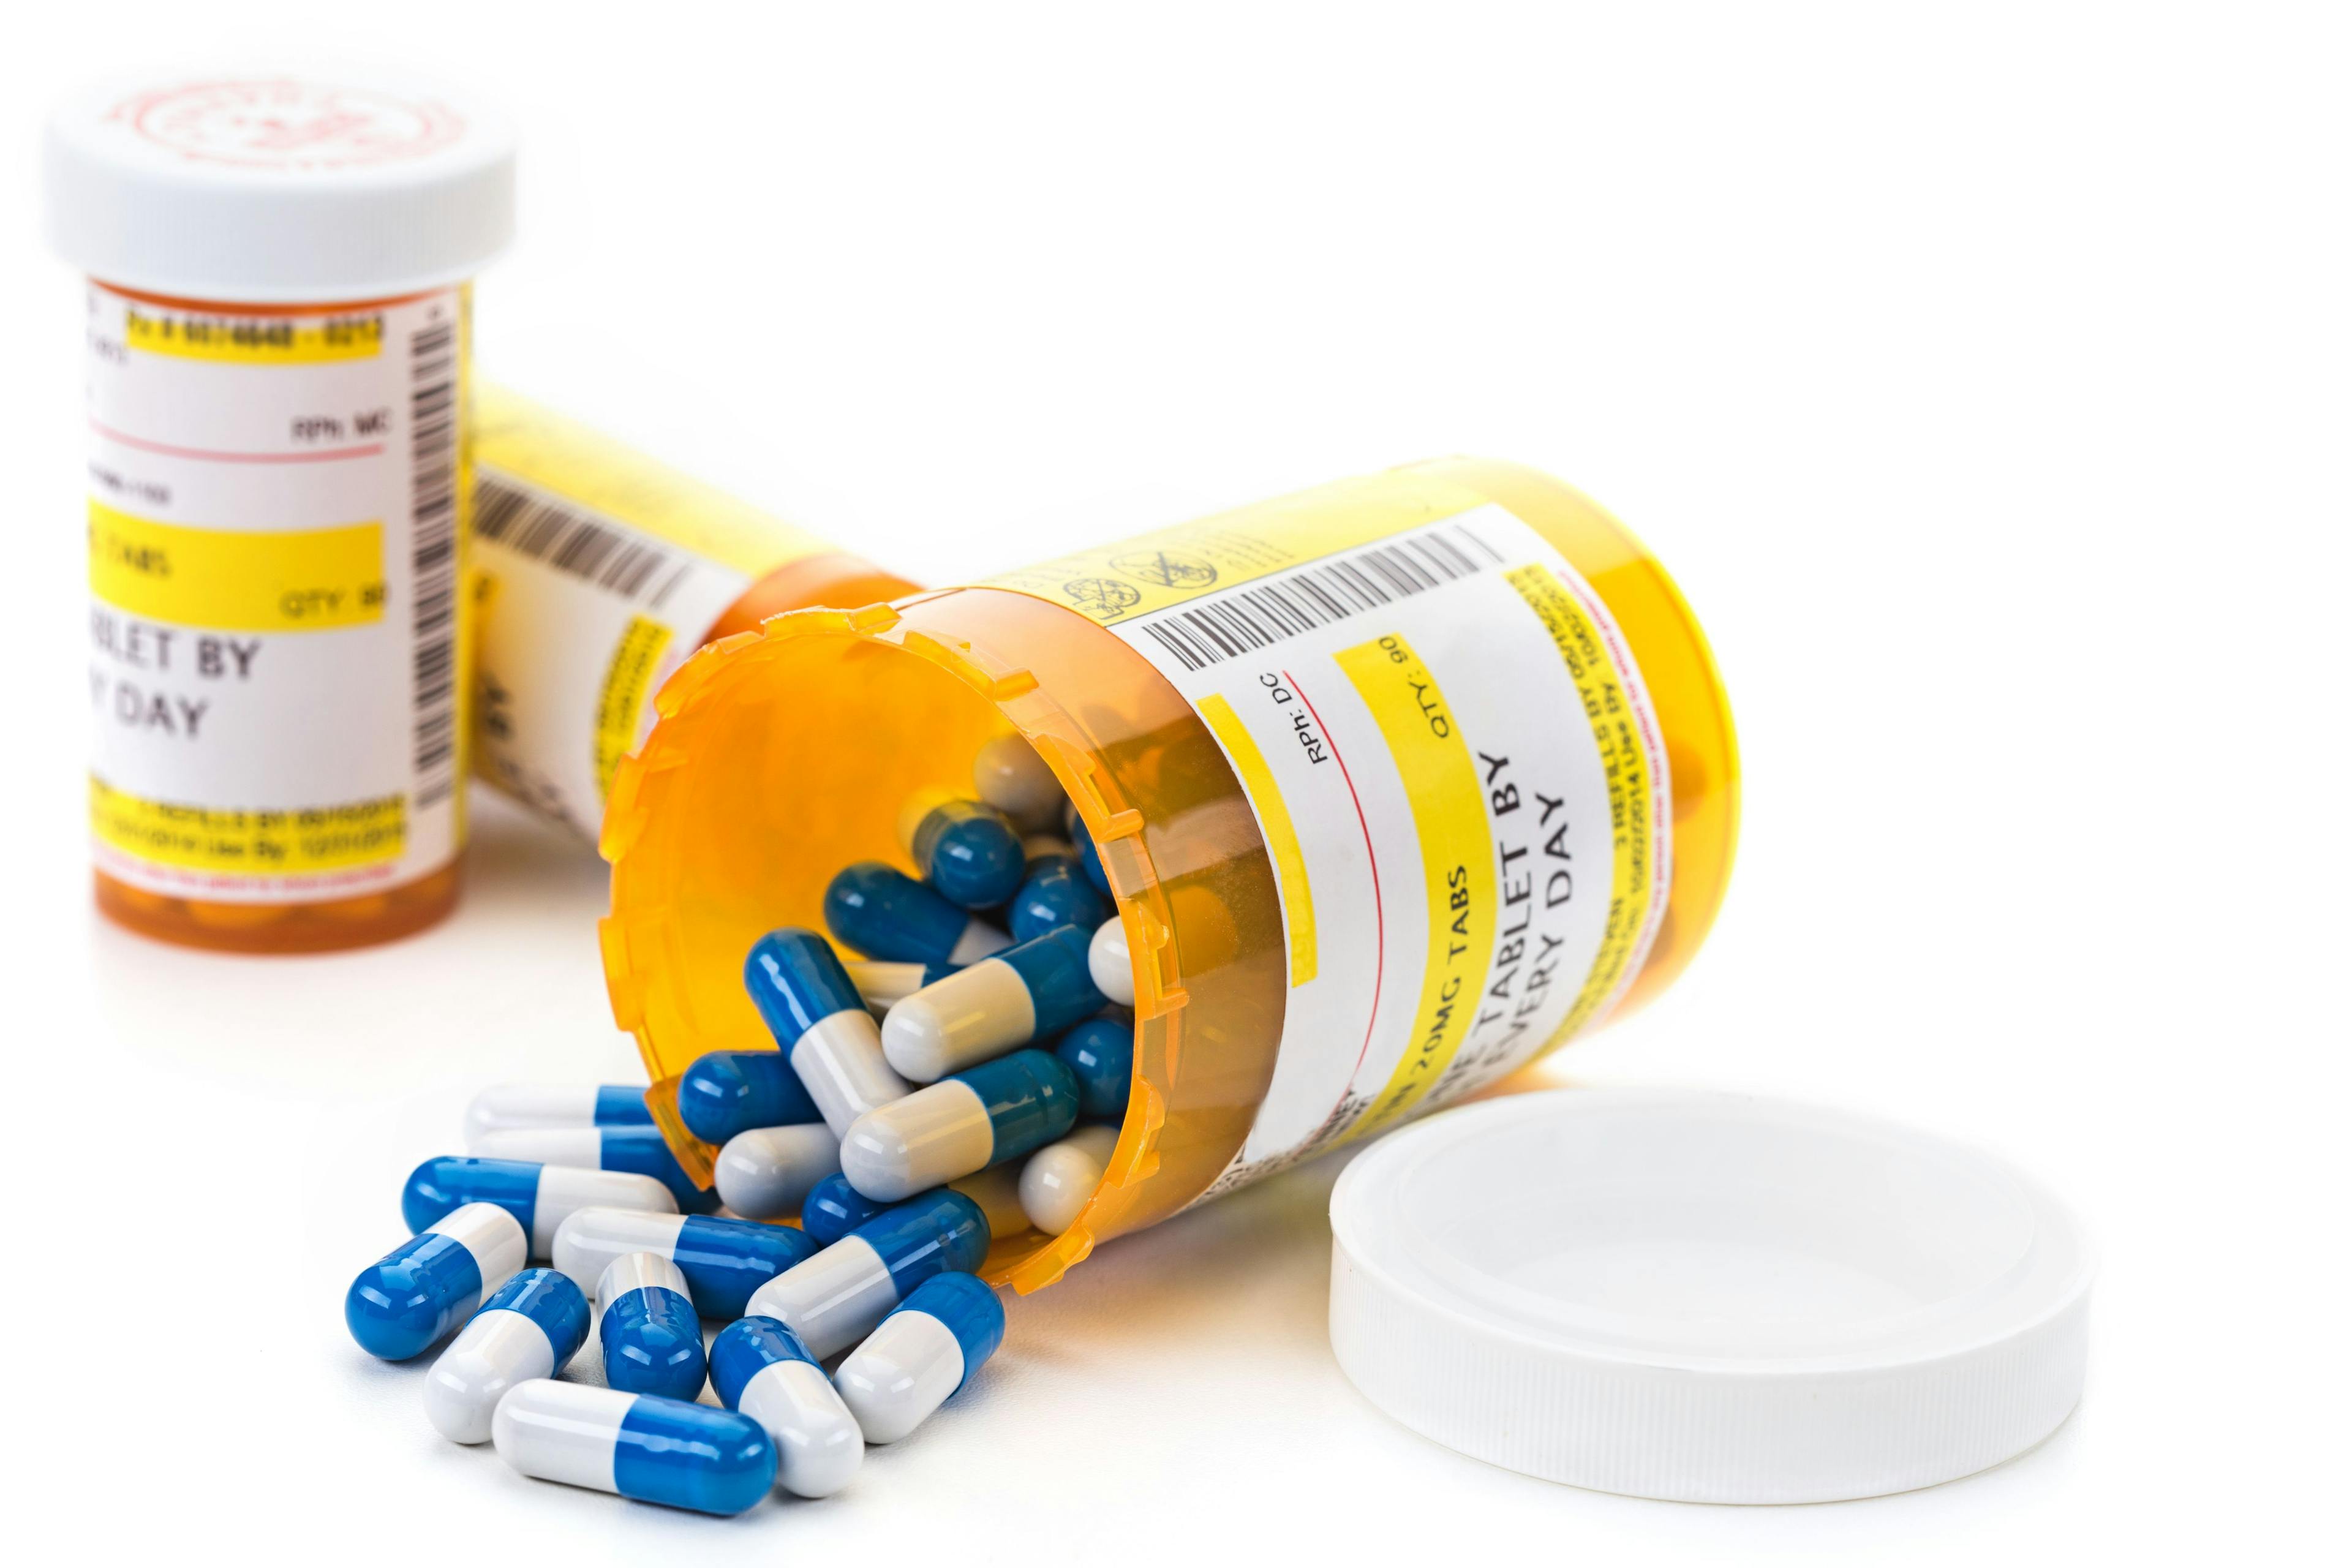 Can Patient-Centered Prescription Labels Increase Medication Adherence?